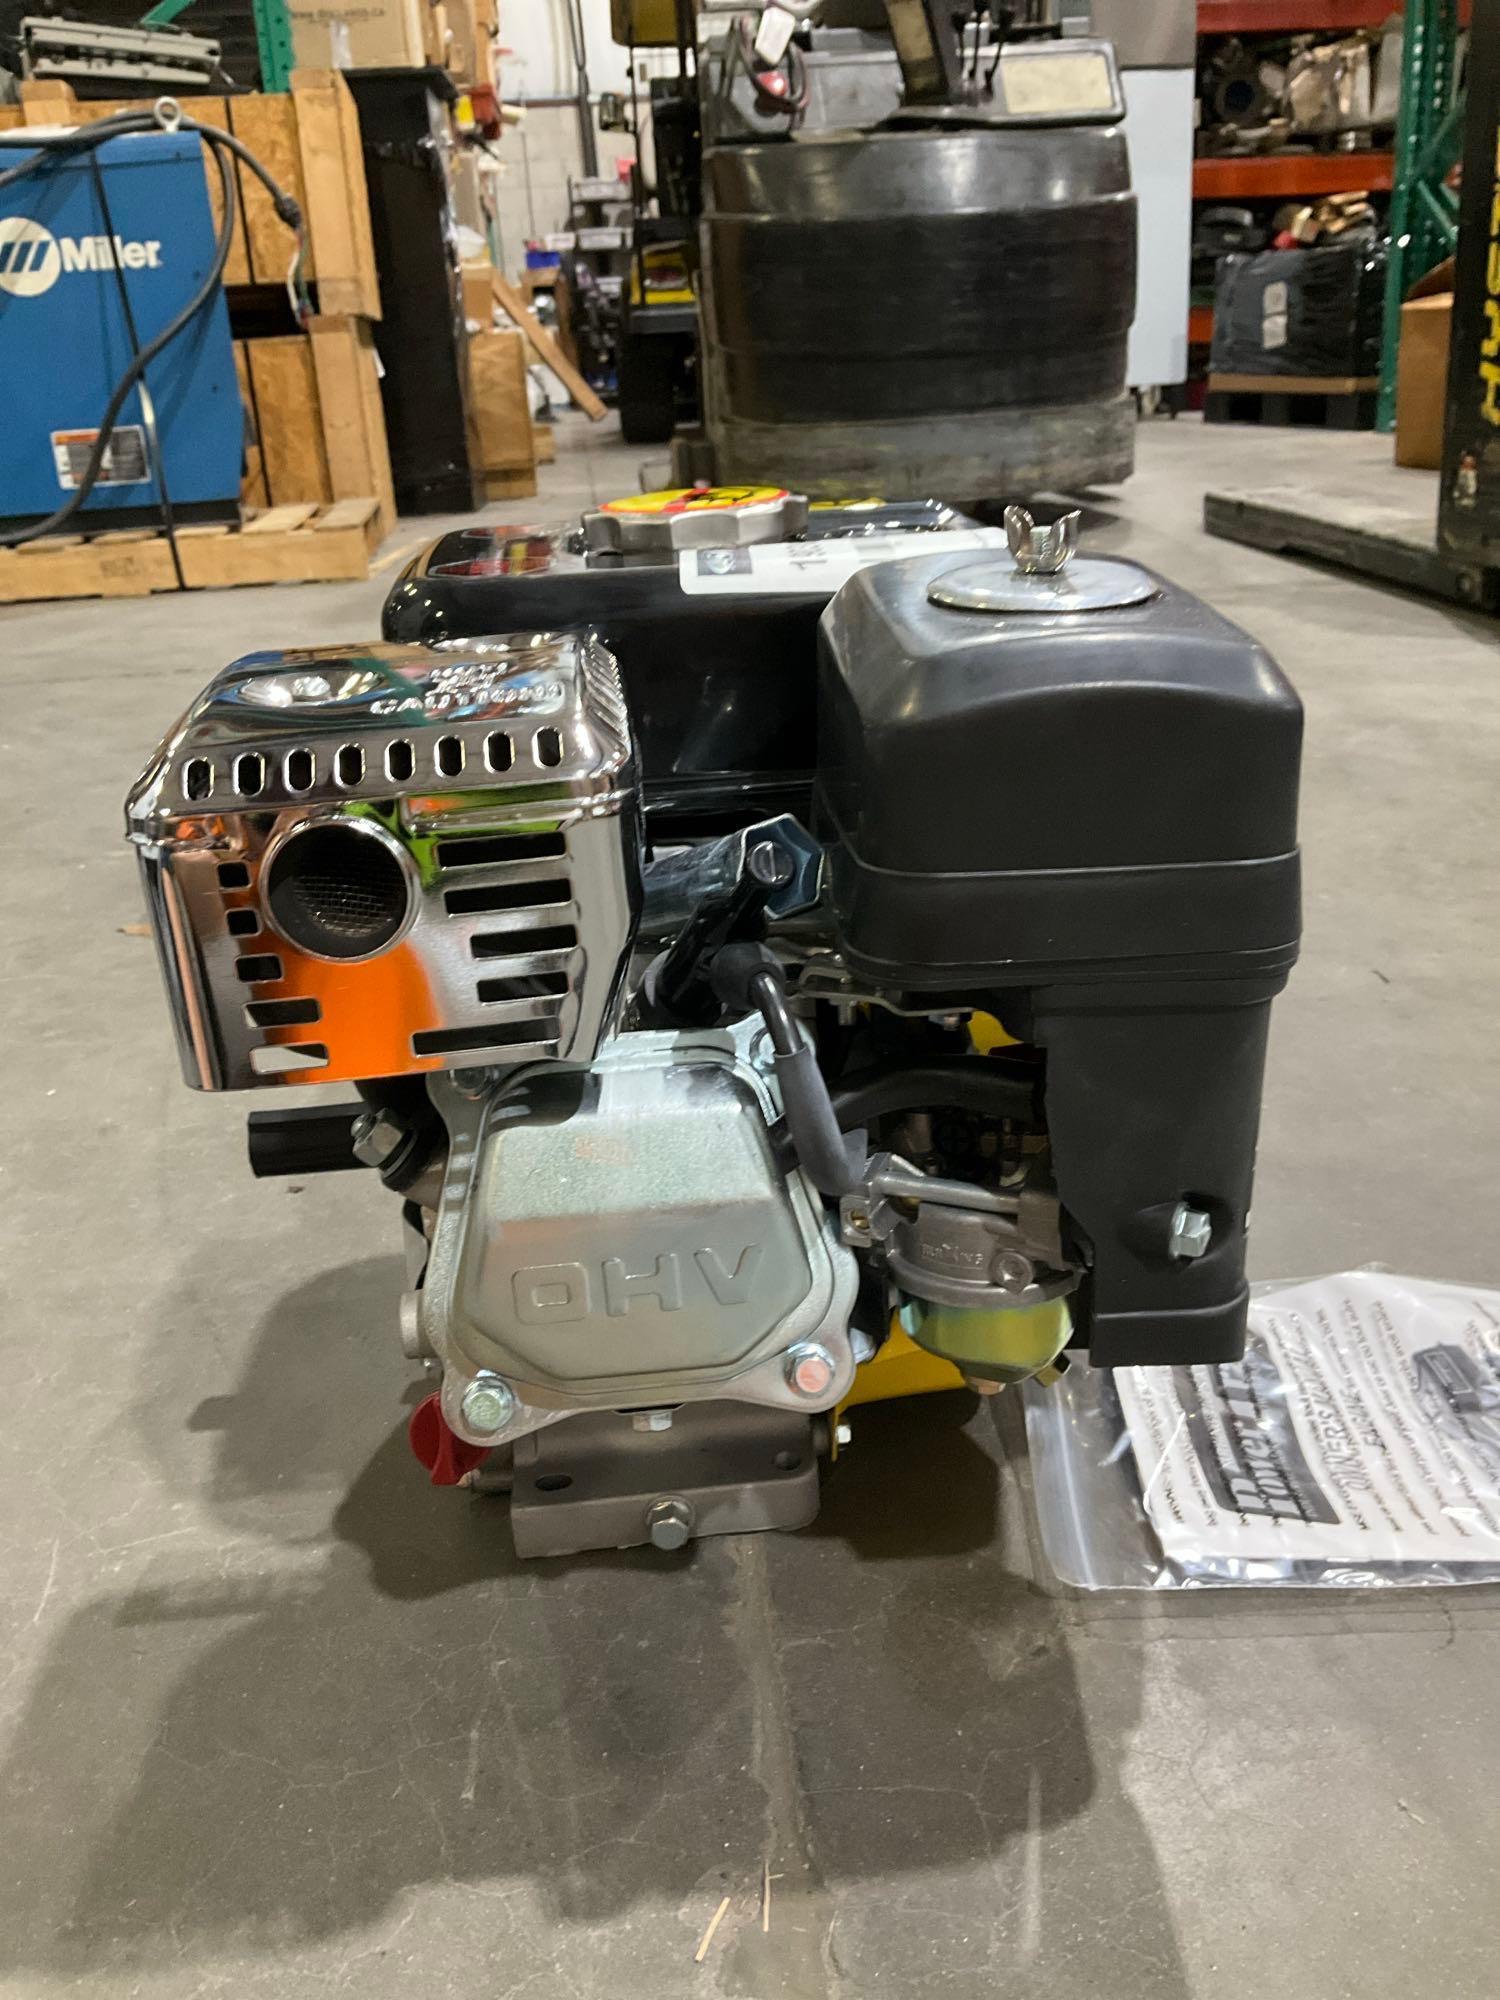 UNUSED POWERTRAIN...PT400 ENGINE, OWNERS MANUAL INCLUDED...